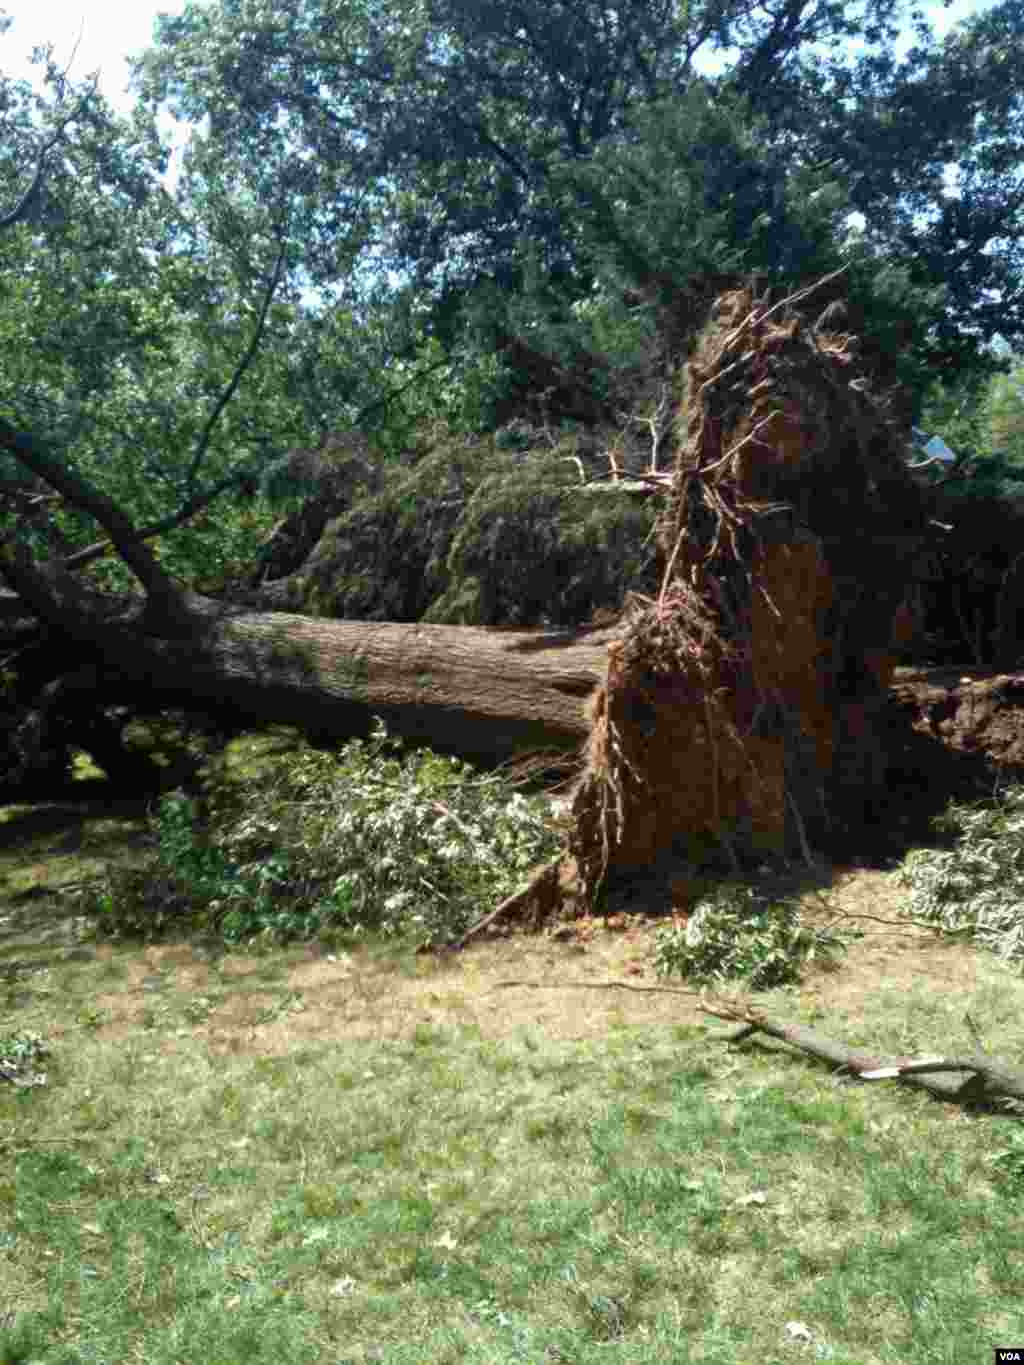 A tree that was knocked down in the storm, Alexandria, Virginia, June 30, 2012. (K. Maddux/VOA)